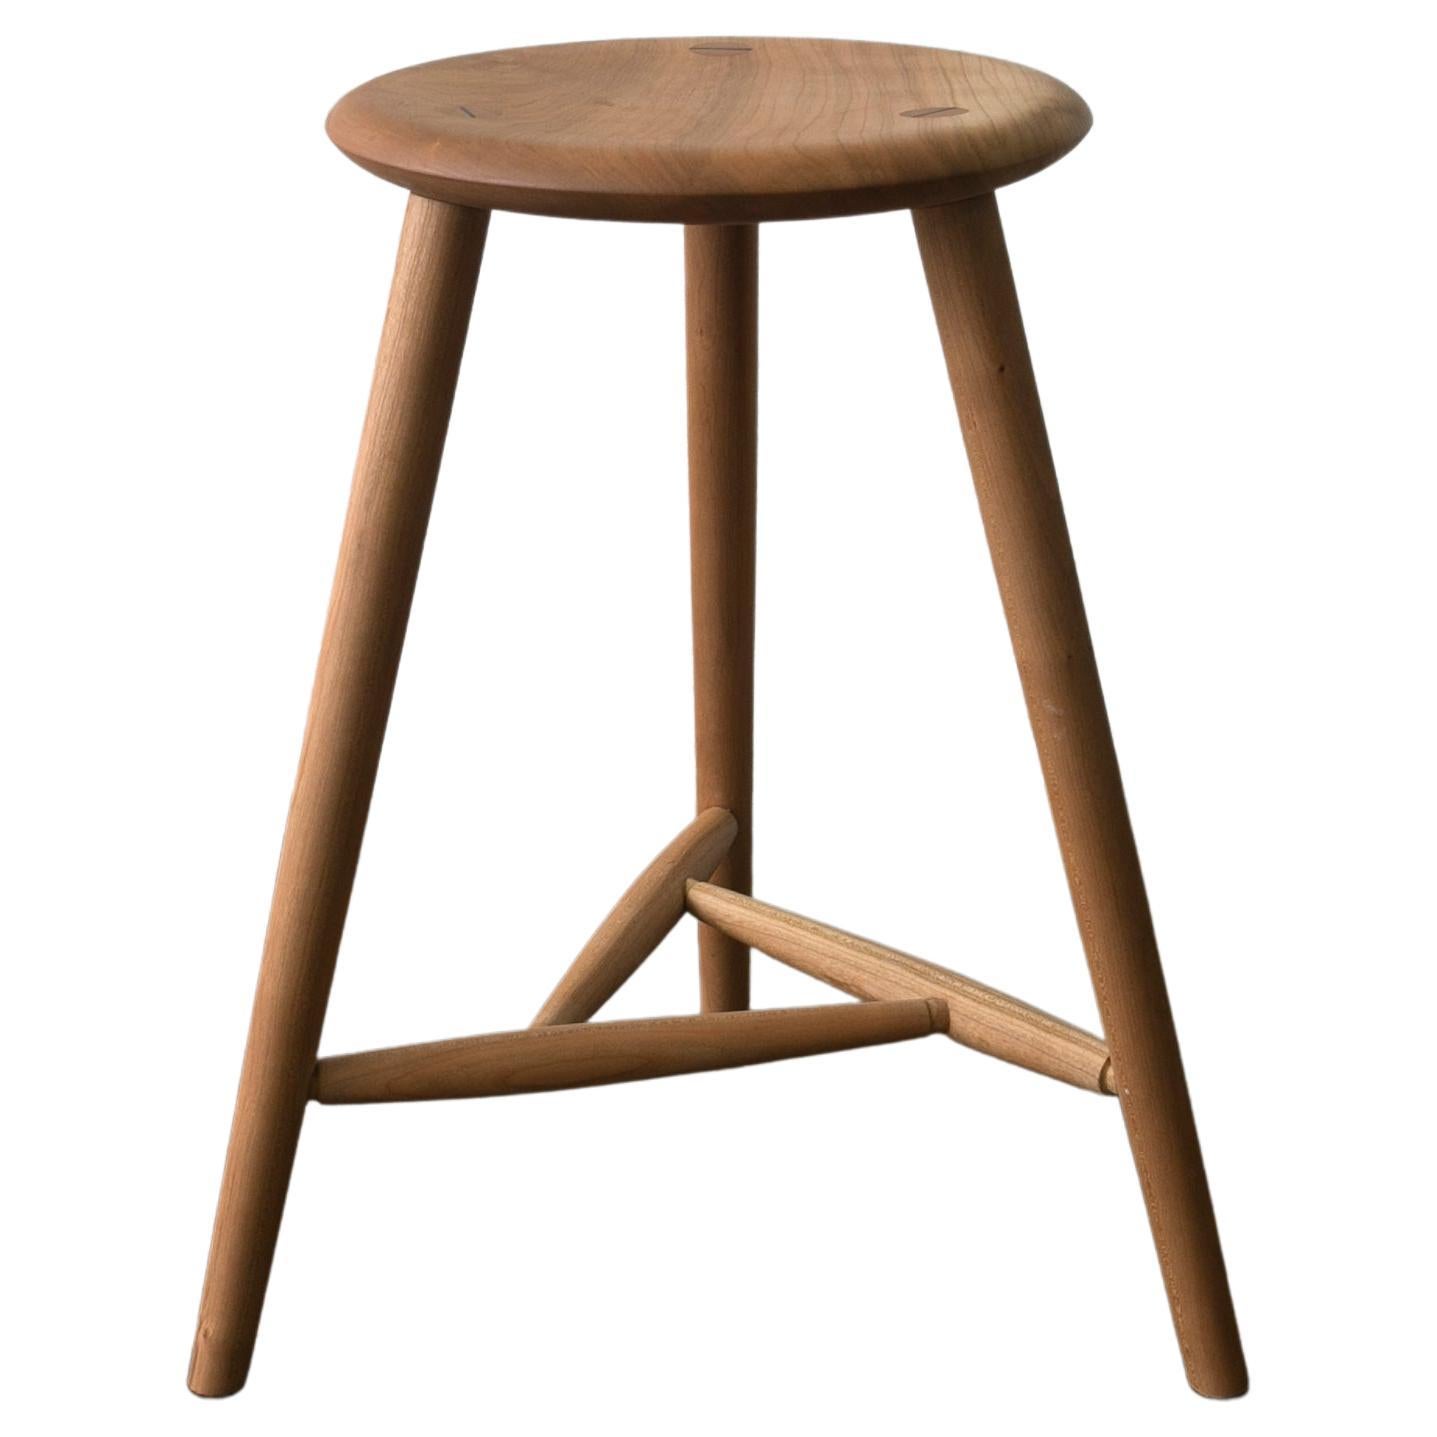 The Fuugs Yarrow 3 legged stool is designed for easy use and comfort. The hand sculpted seat provides a comfortable place to rest at a counter or a table. The stools’ legs are complemented by a self reinforcing triangle pattern of tenons, a theme